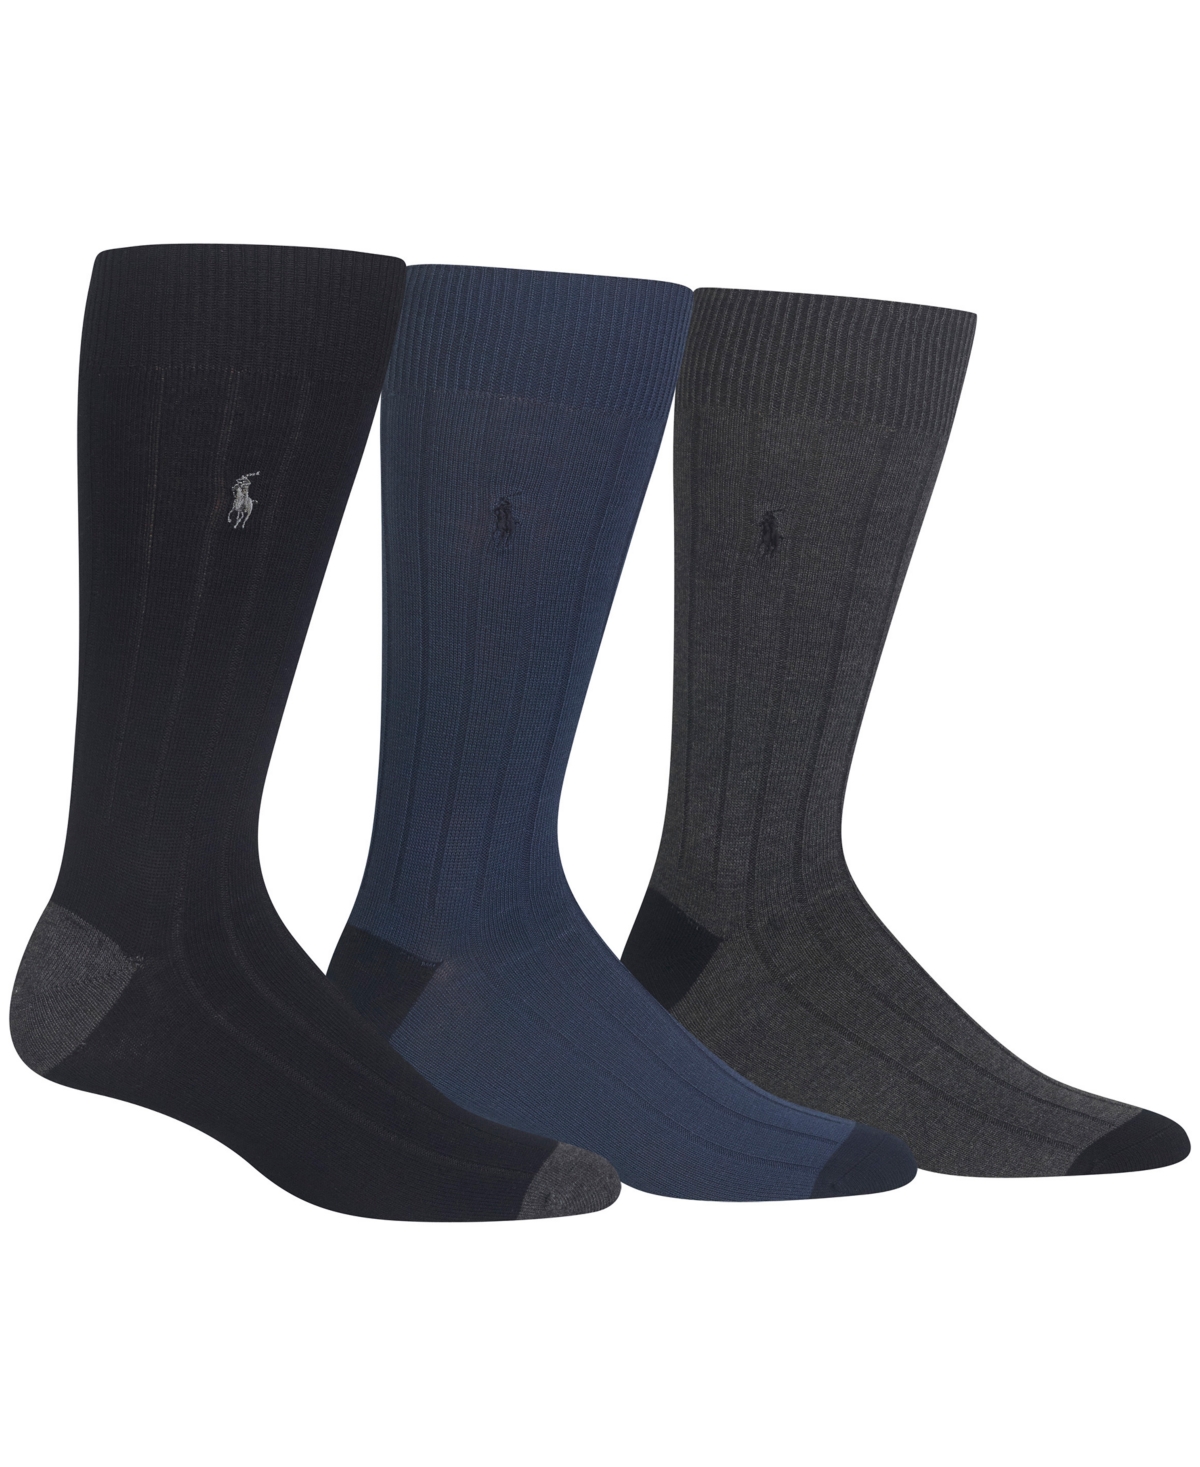 Shop Polo Ralph Lauren Men's Socks, Soft Touch Ribbed Heel Toe 3 Pack In Black,blue,charcoal